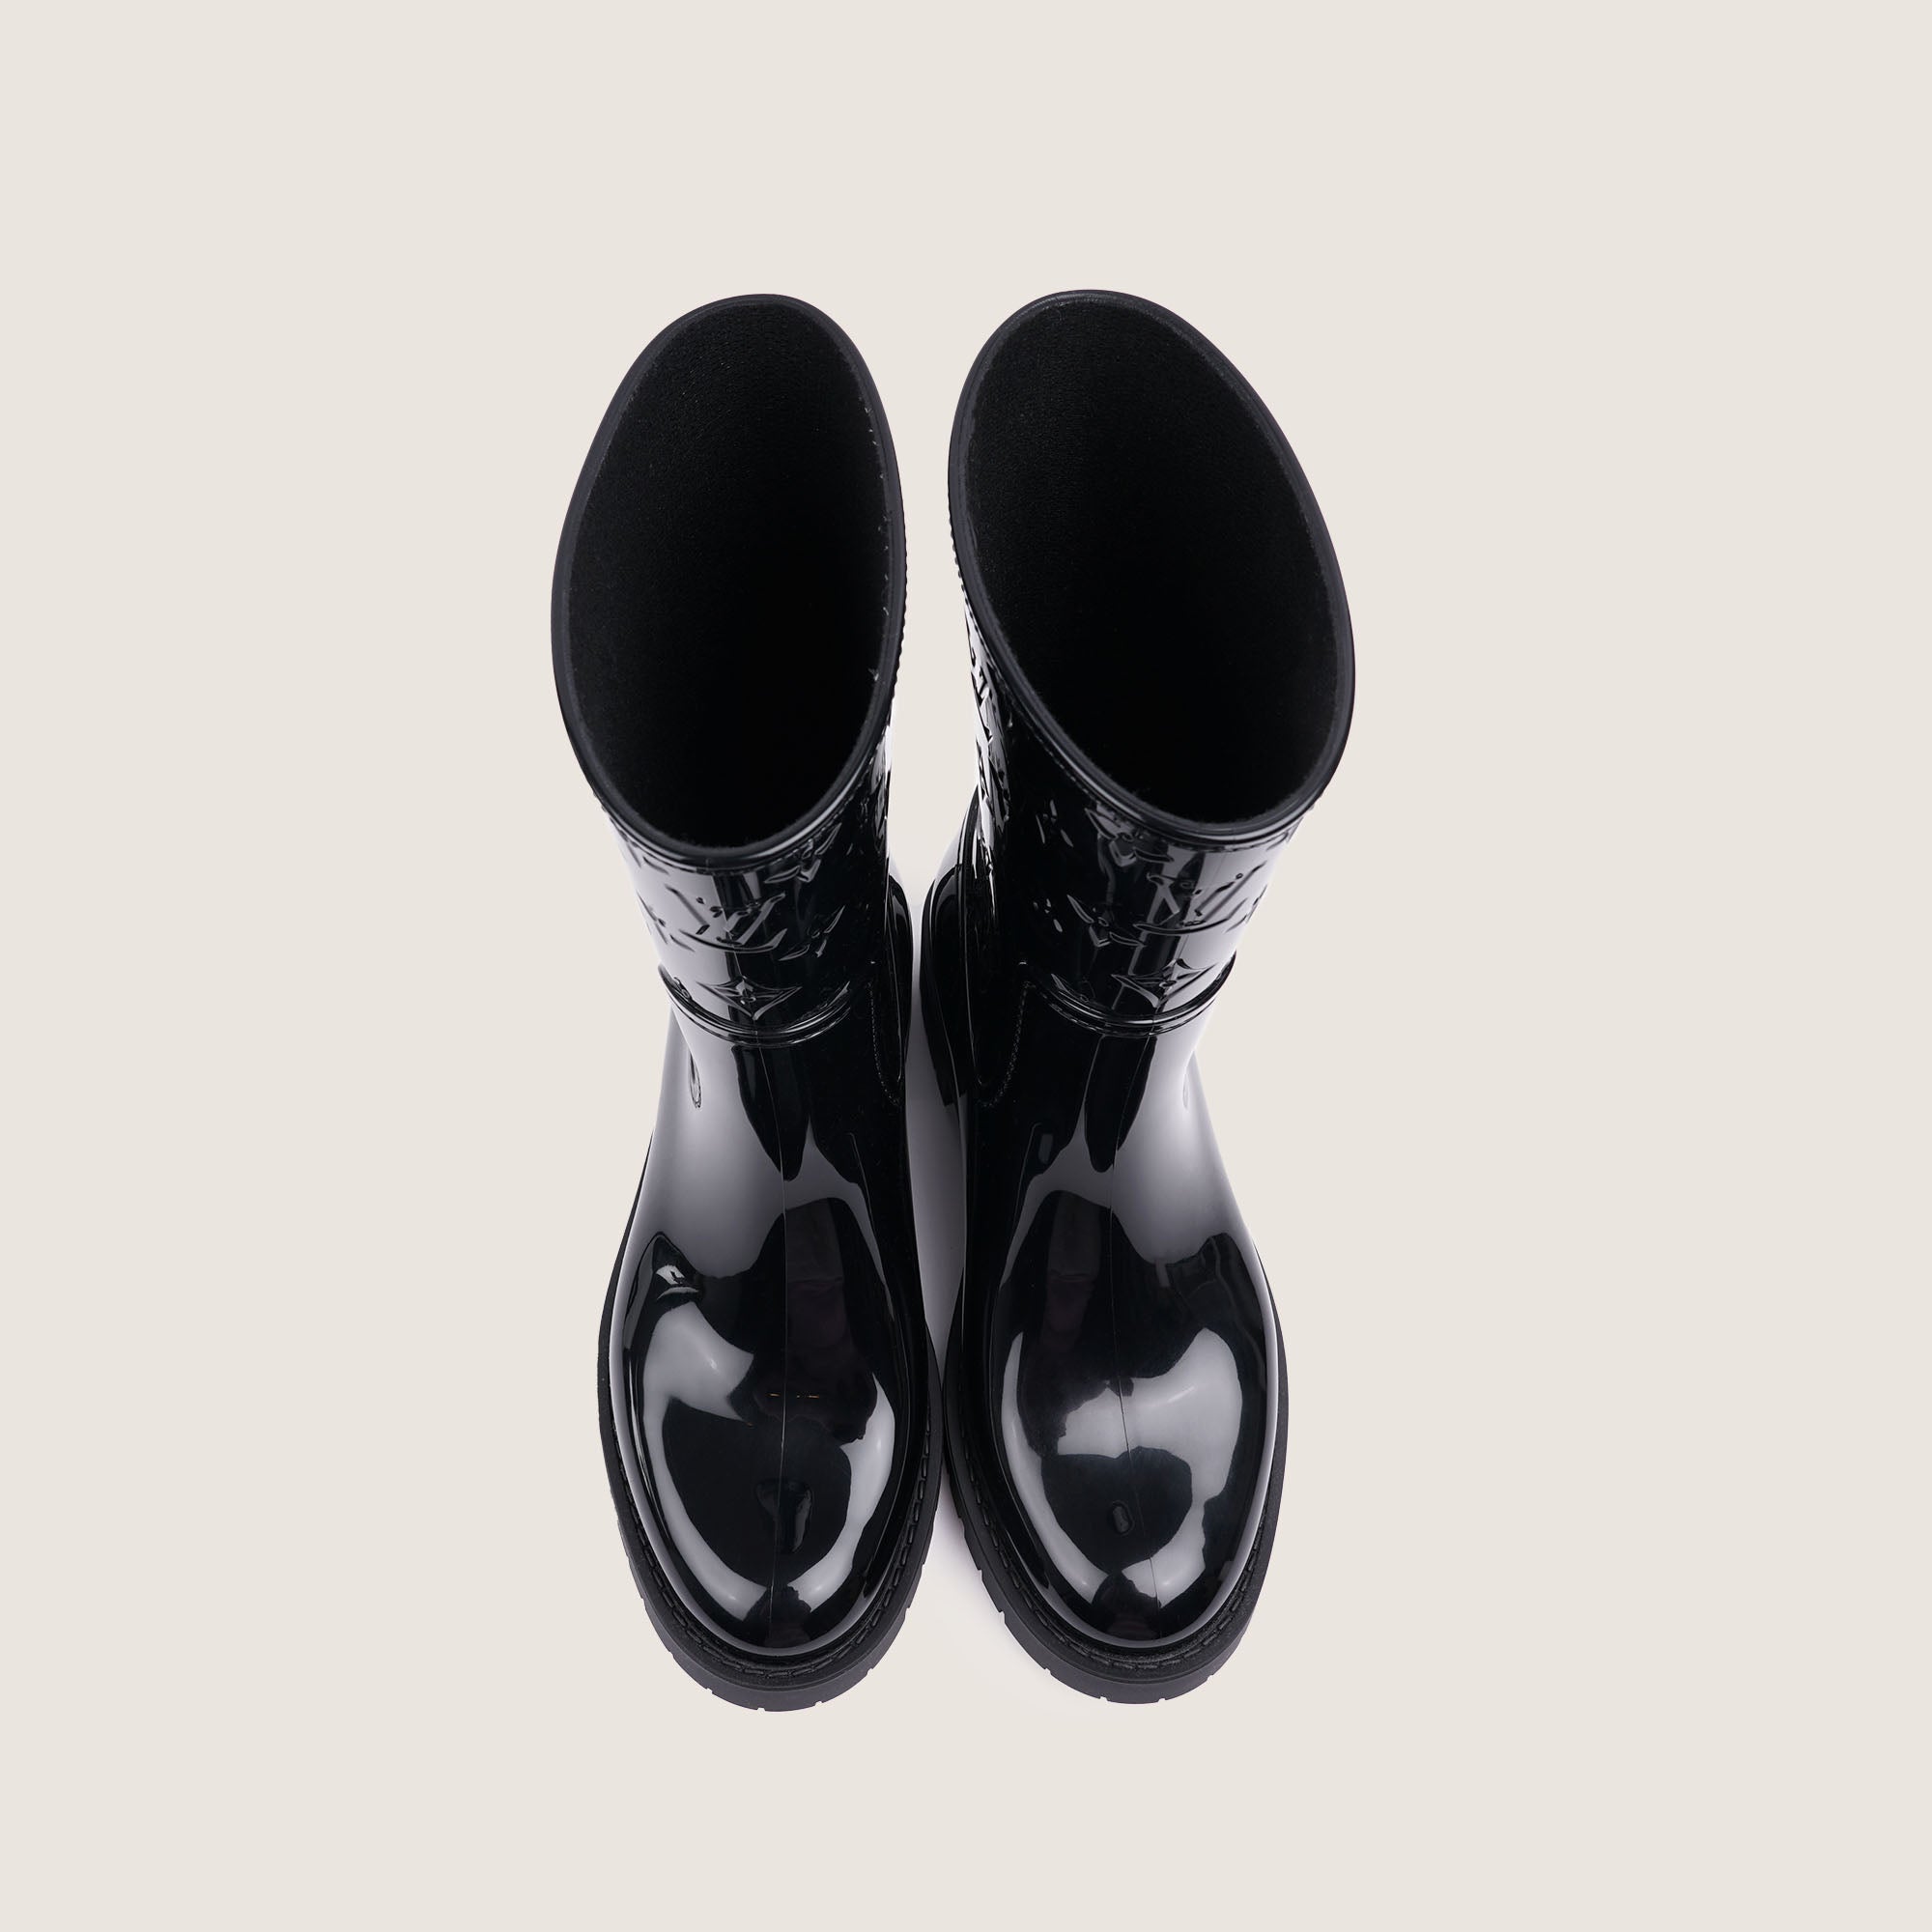 Drops Flat Half Boots 37 - LOUIS VUITTON - Affordable Luxury image